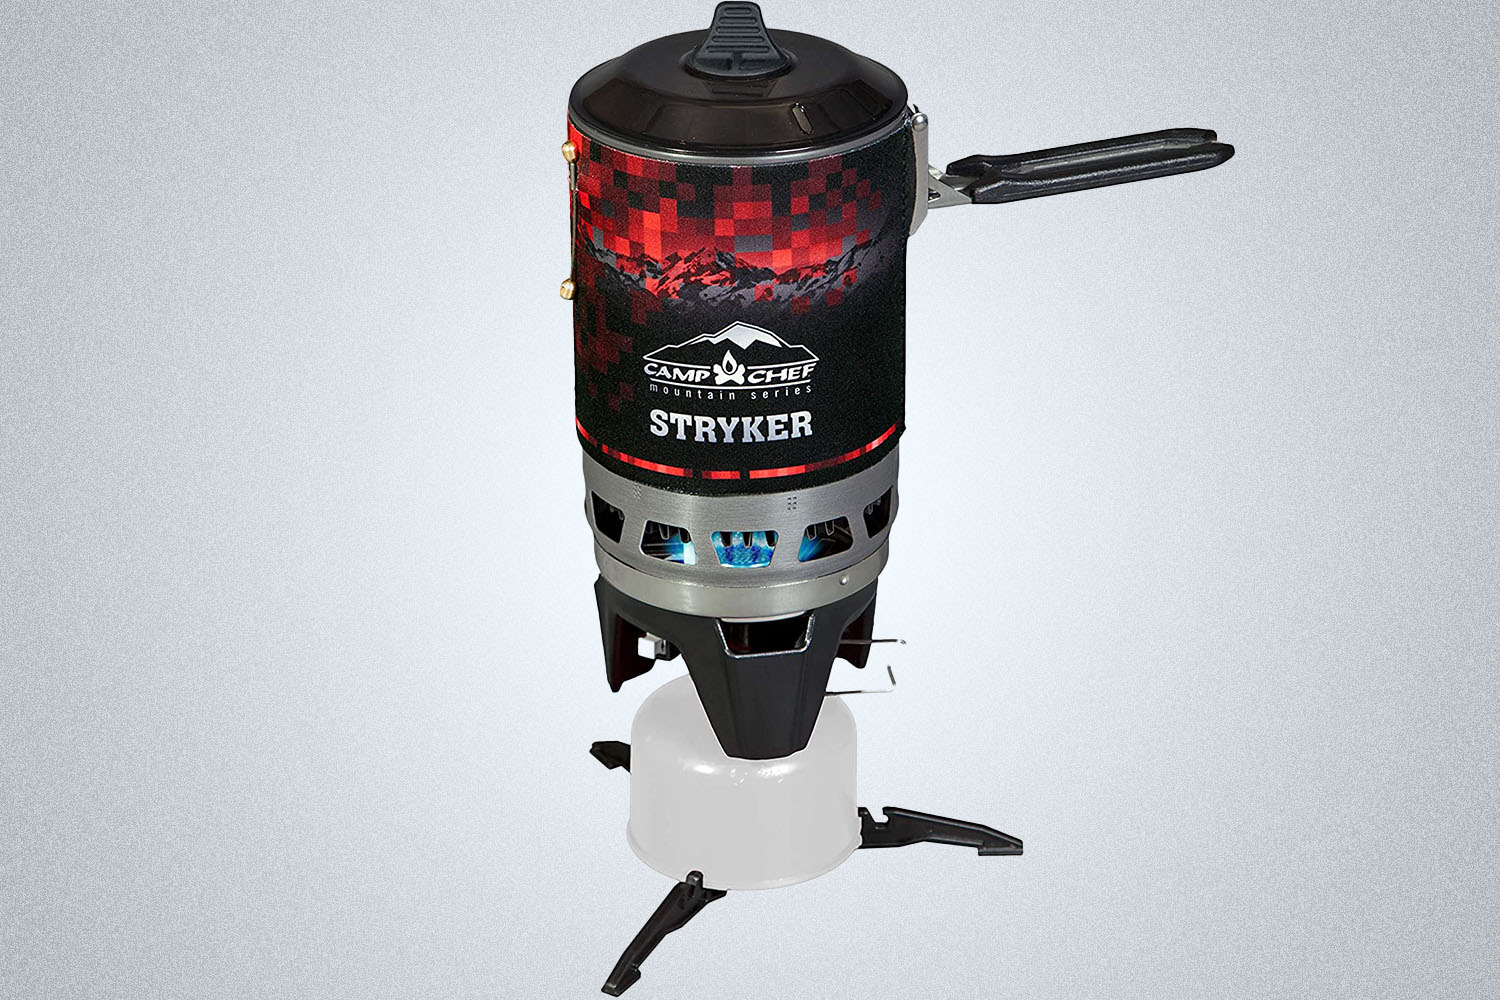 A Camp Chef Stryker 100 Stove on a gray background